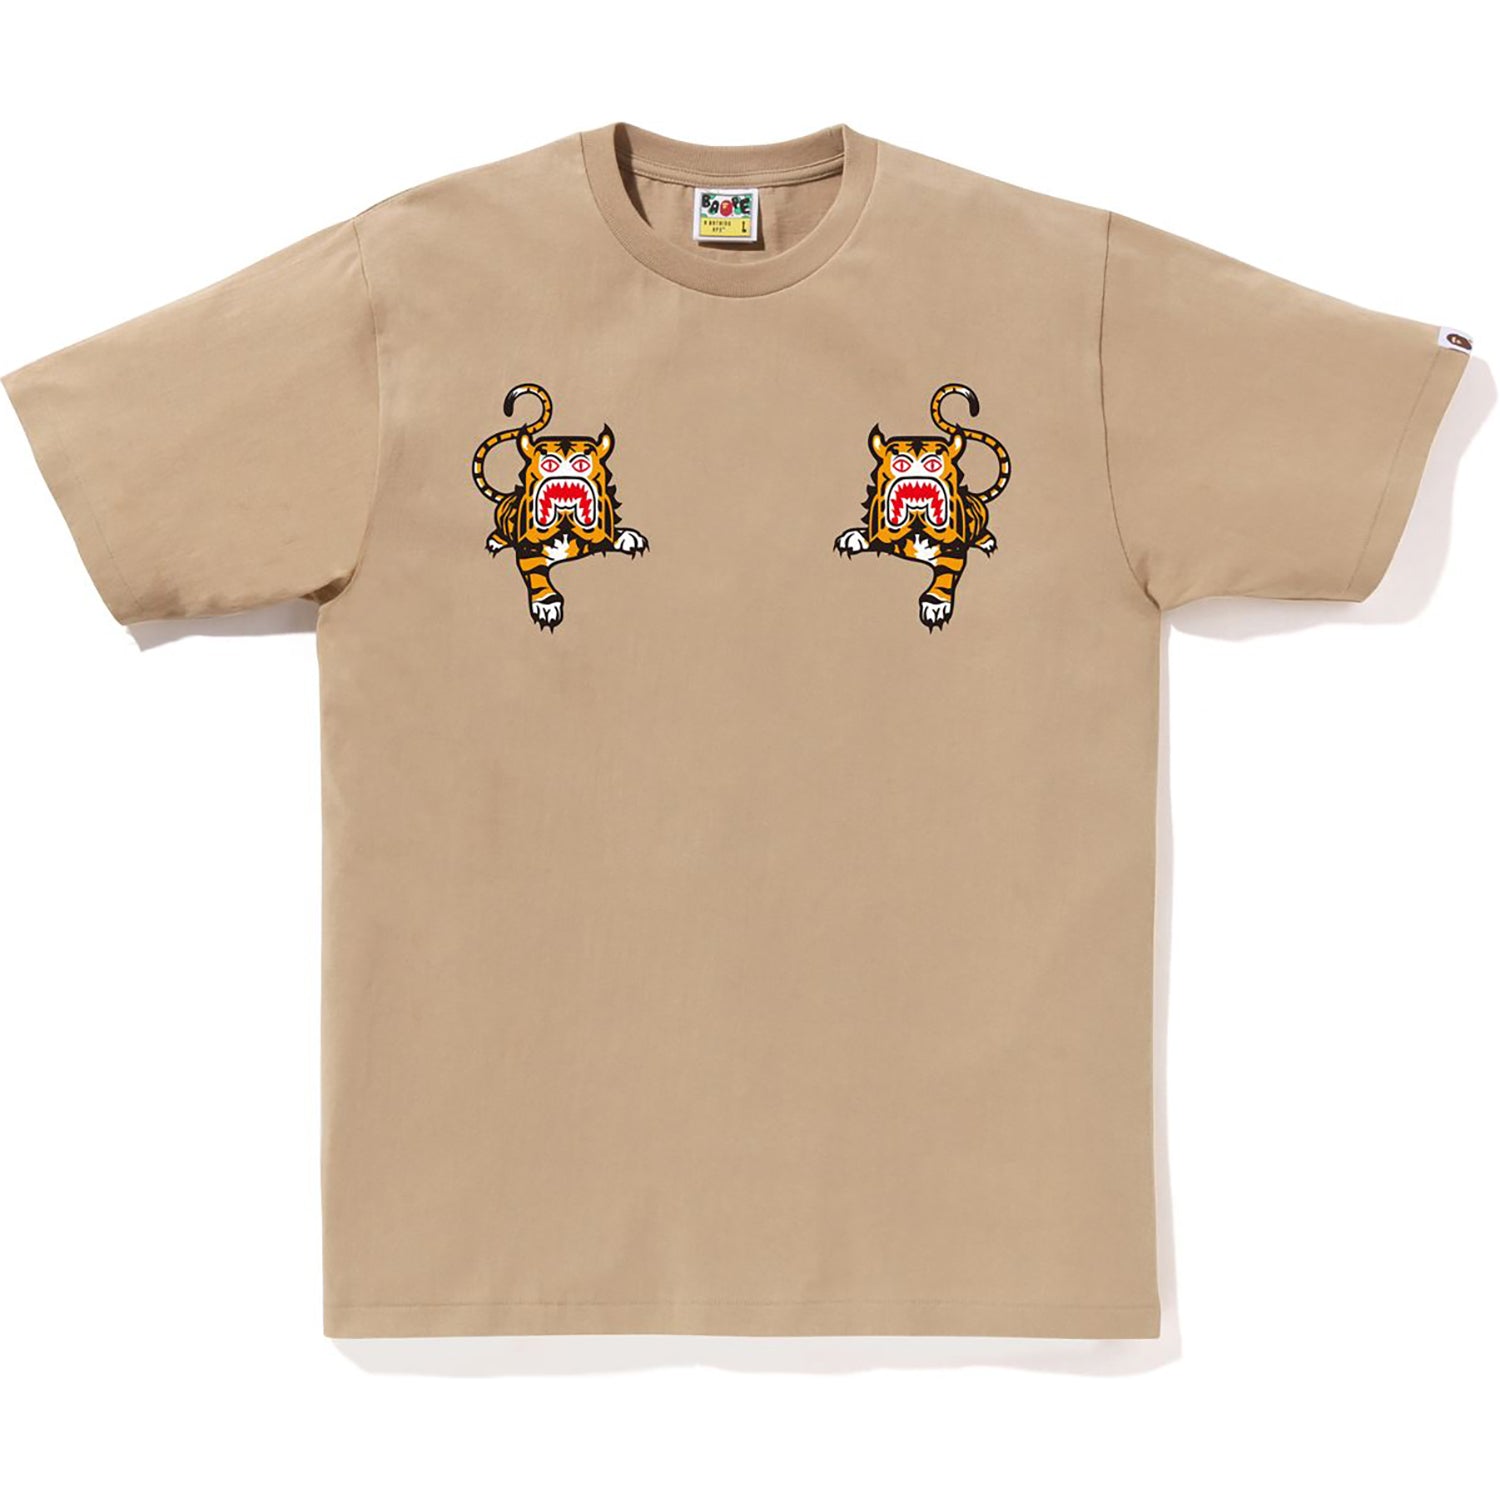 BAPE Year of the Tiger Tee White